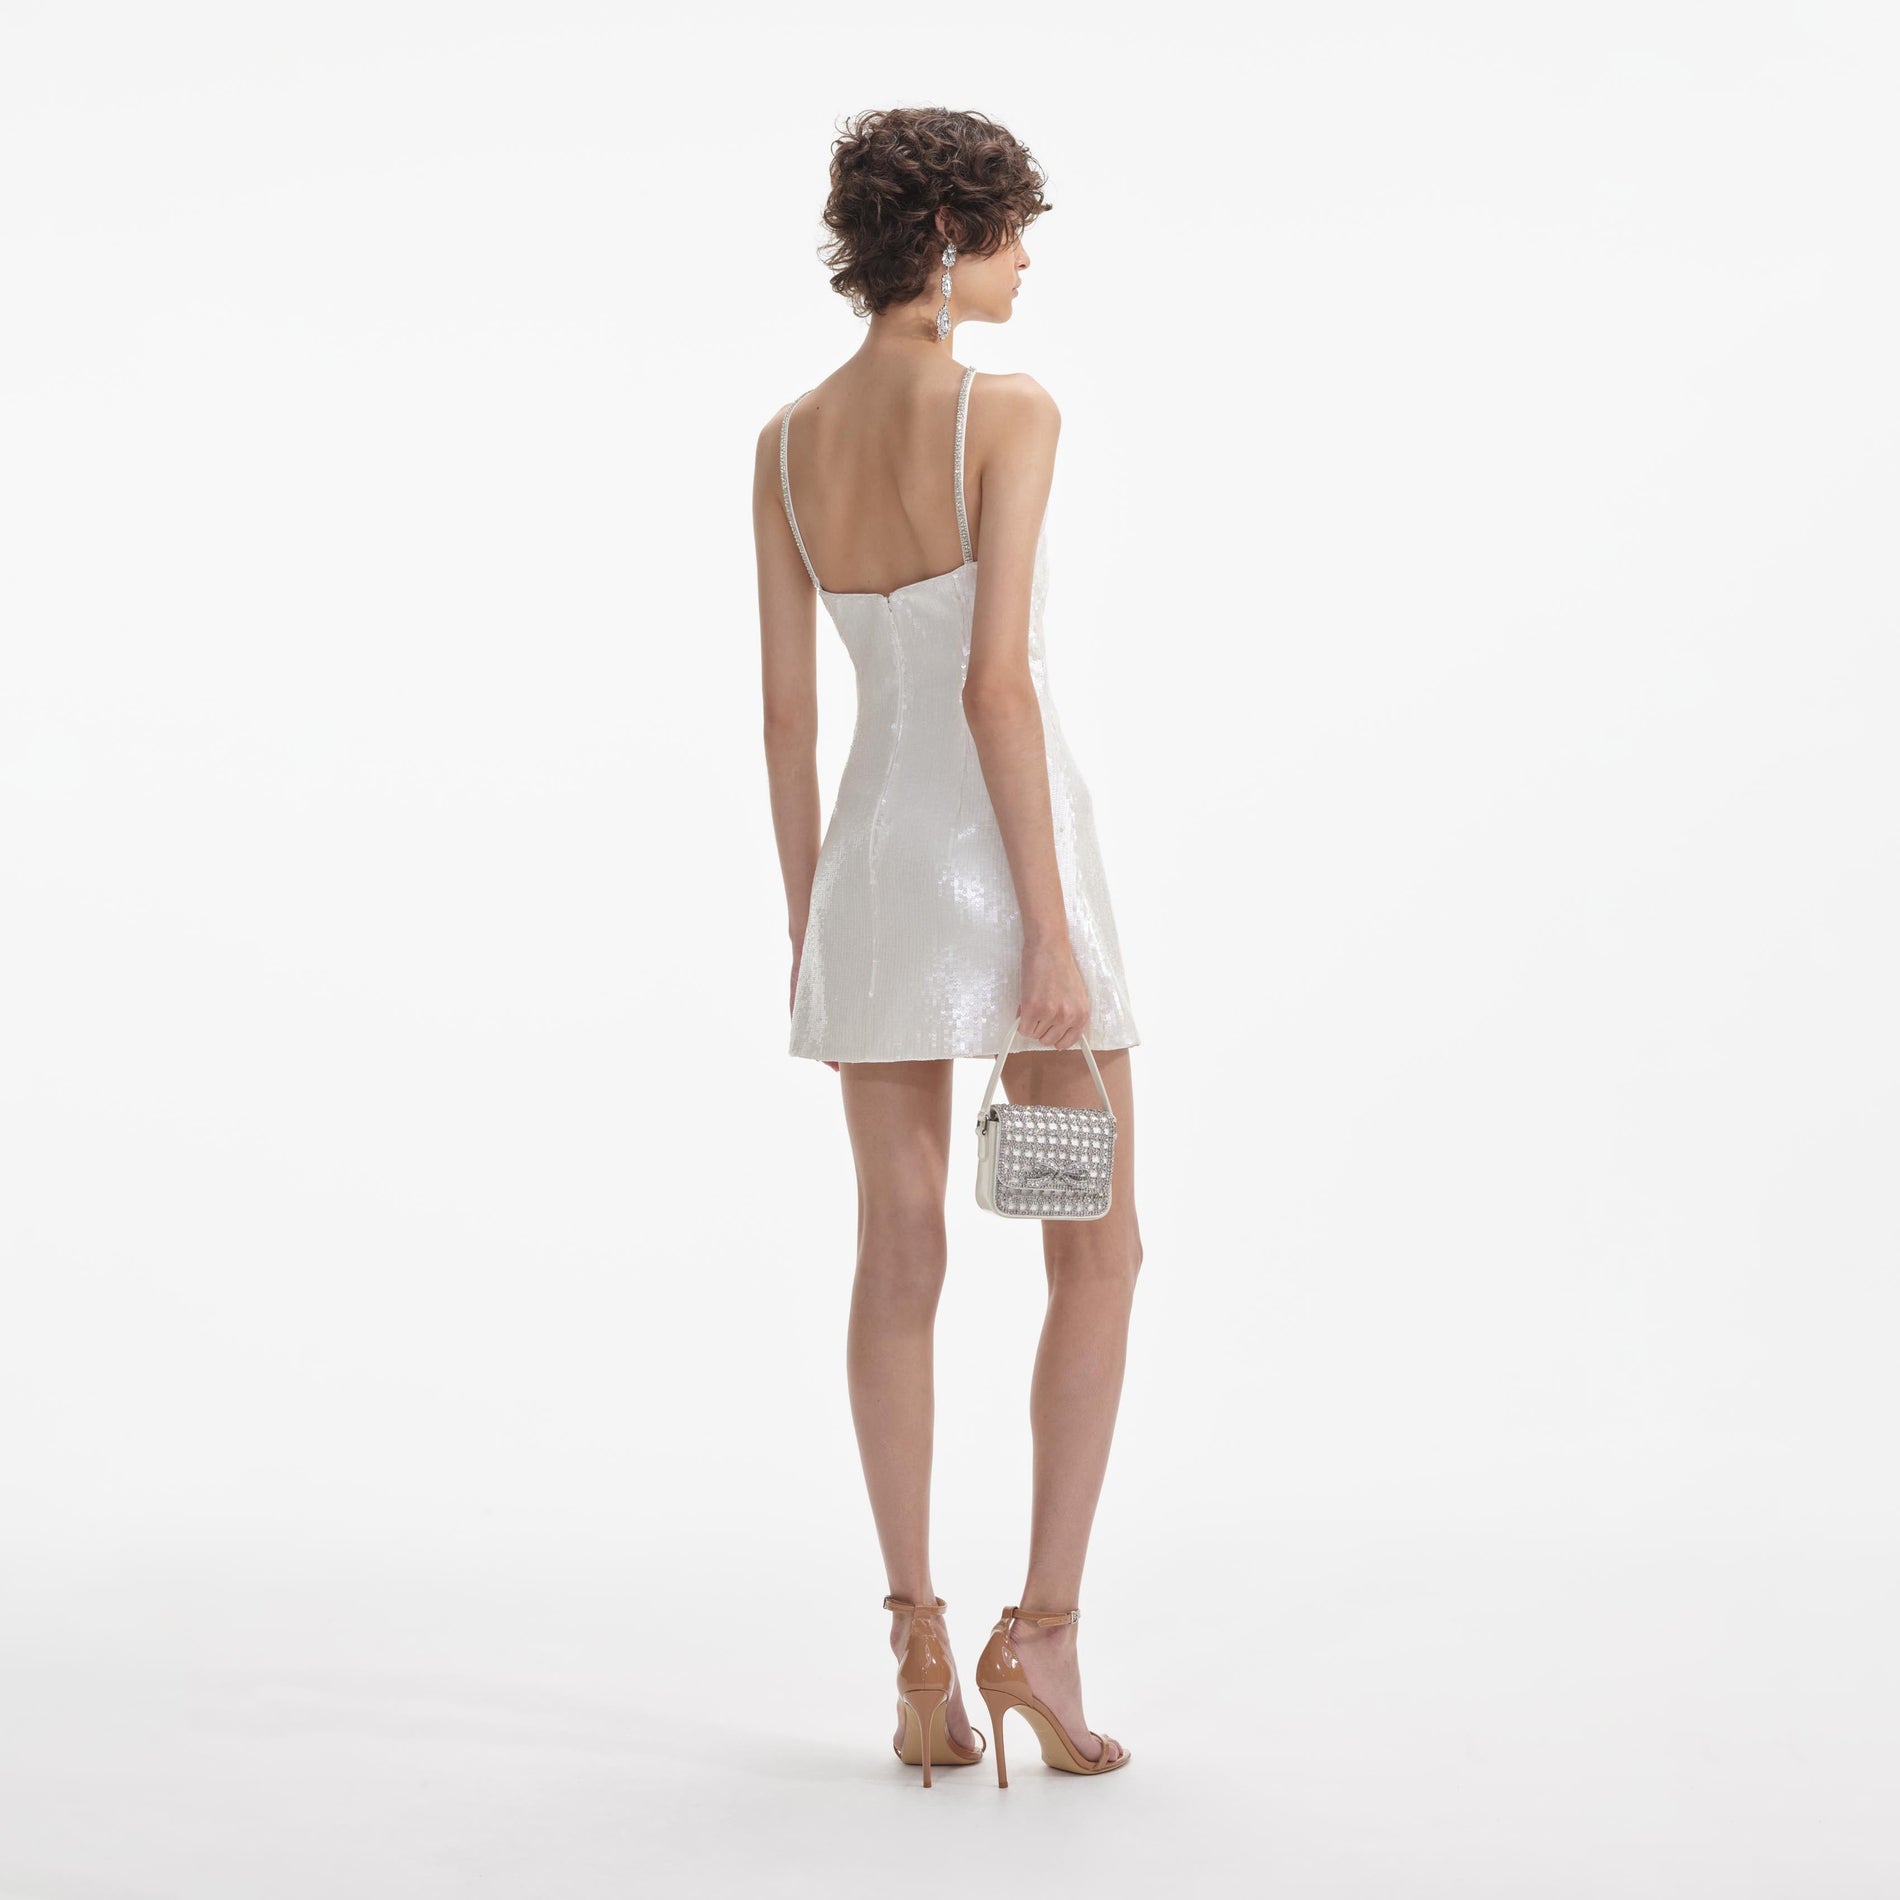 Back view of a woman wearing the White Cream Sequin Halter Mini Dress